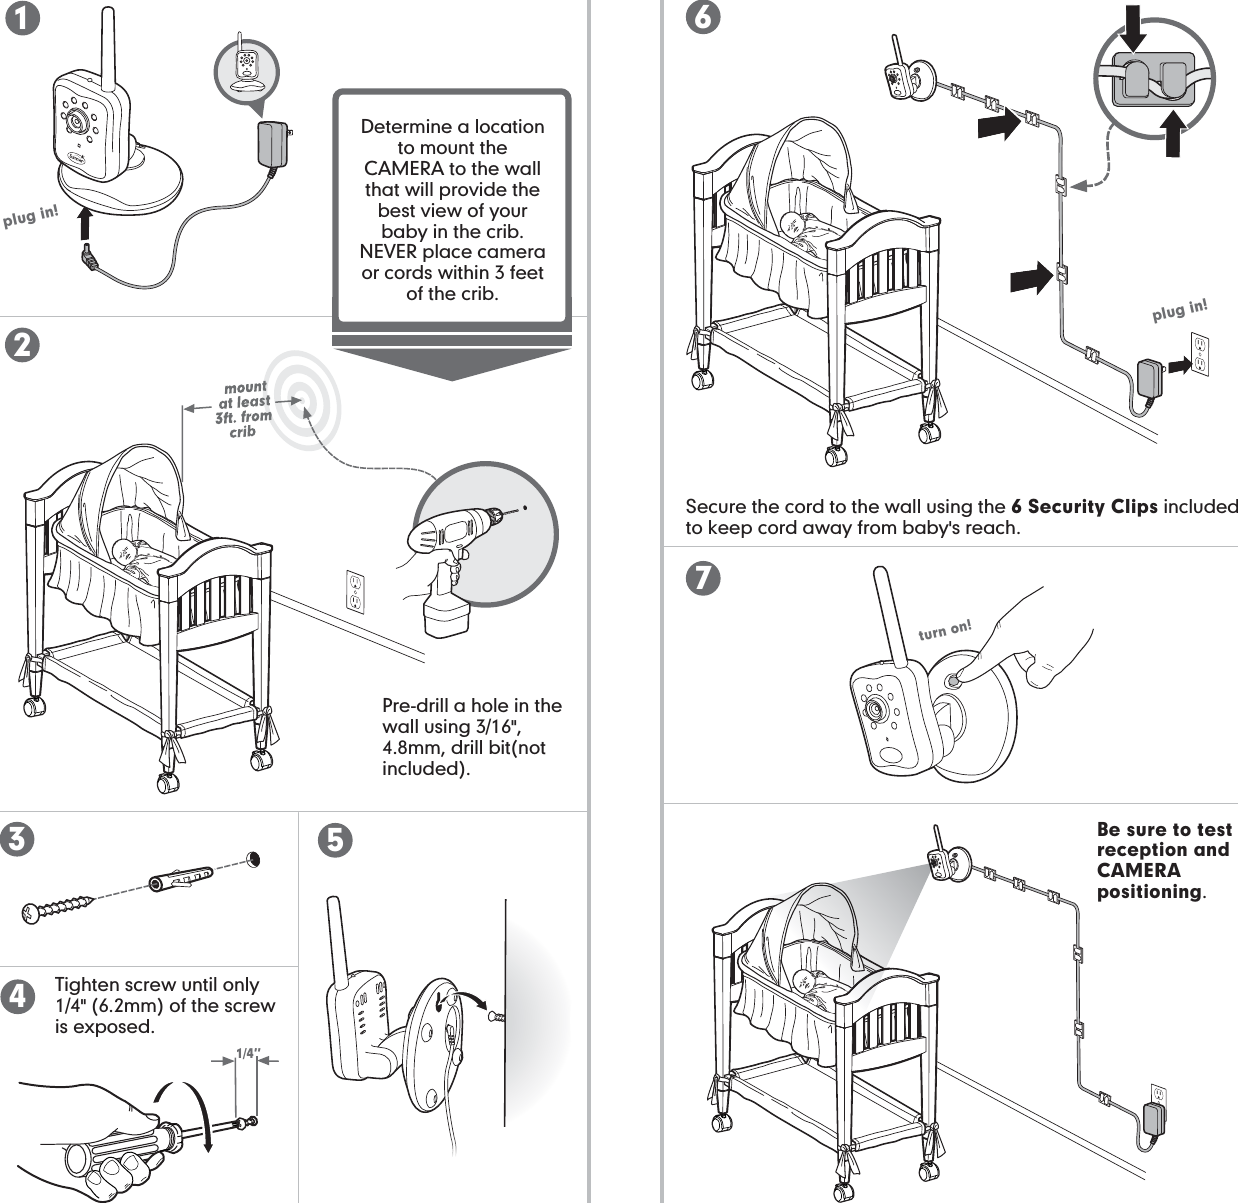 camera set-up (wall mount): camera set-up (wall mount):Be sure to test reception and CAMERA positioning.1/4”plug in!turn on!plug in!Determine a location to mount the CAMERA to the wall that will provide the best view of your baby in the crib. NEVER place camera or cords within 3 feet of the crib. Secure the cord to the wall using the 6 Security Clips included to keep cord away from baby&apos;s reach.Pre-drill a hole in the wall using 3/16&quot;, 4.8mm, drill bit(not included).Tighten screw until only 1/4&quot; (6.2mm) of the screw is exposed.2356417